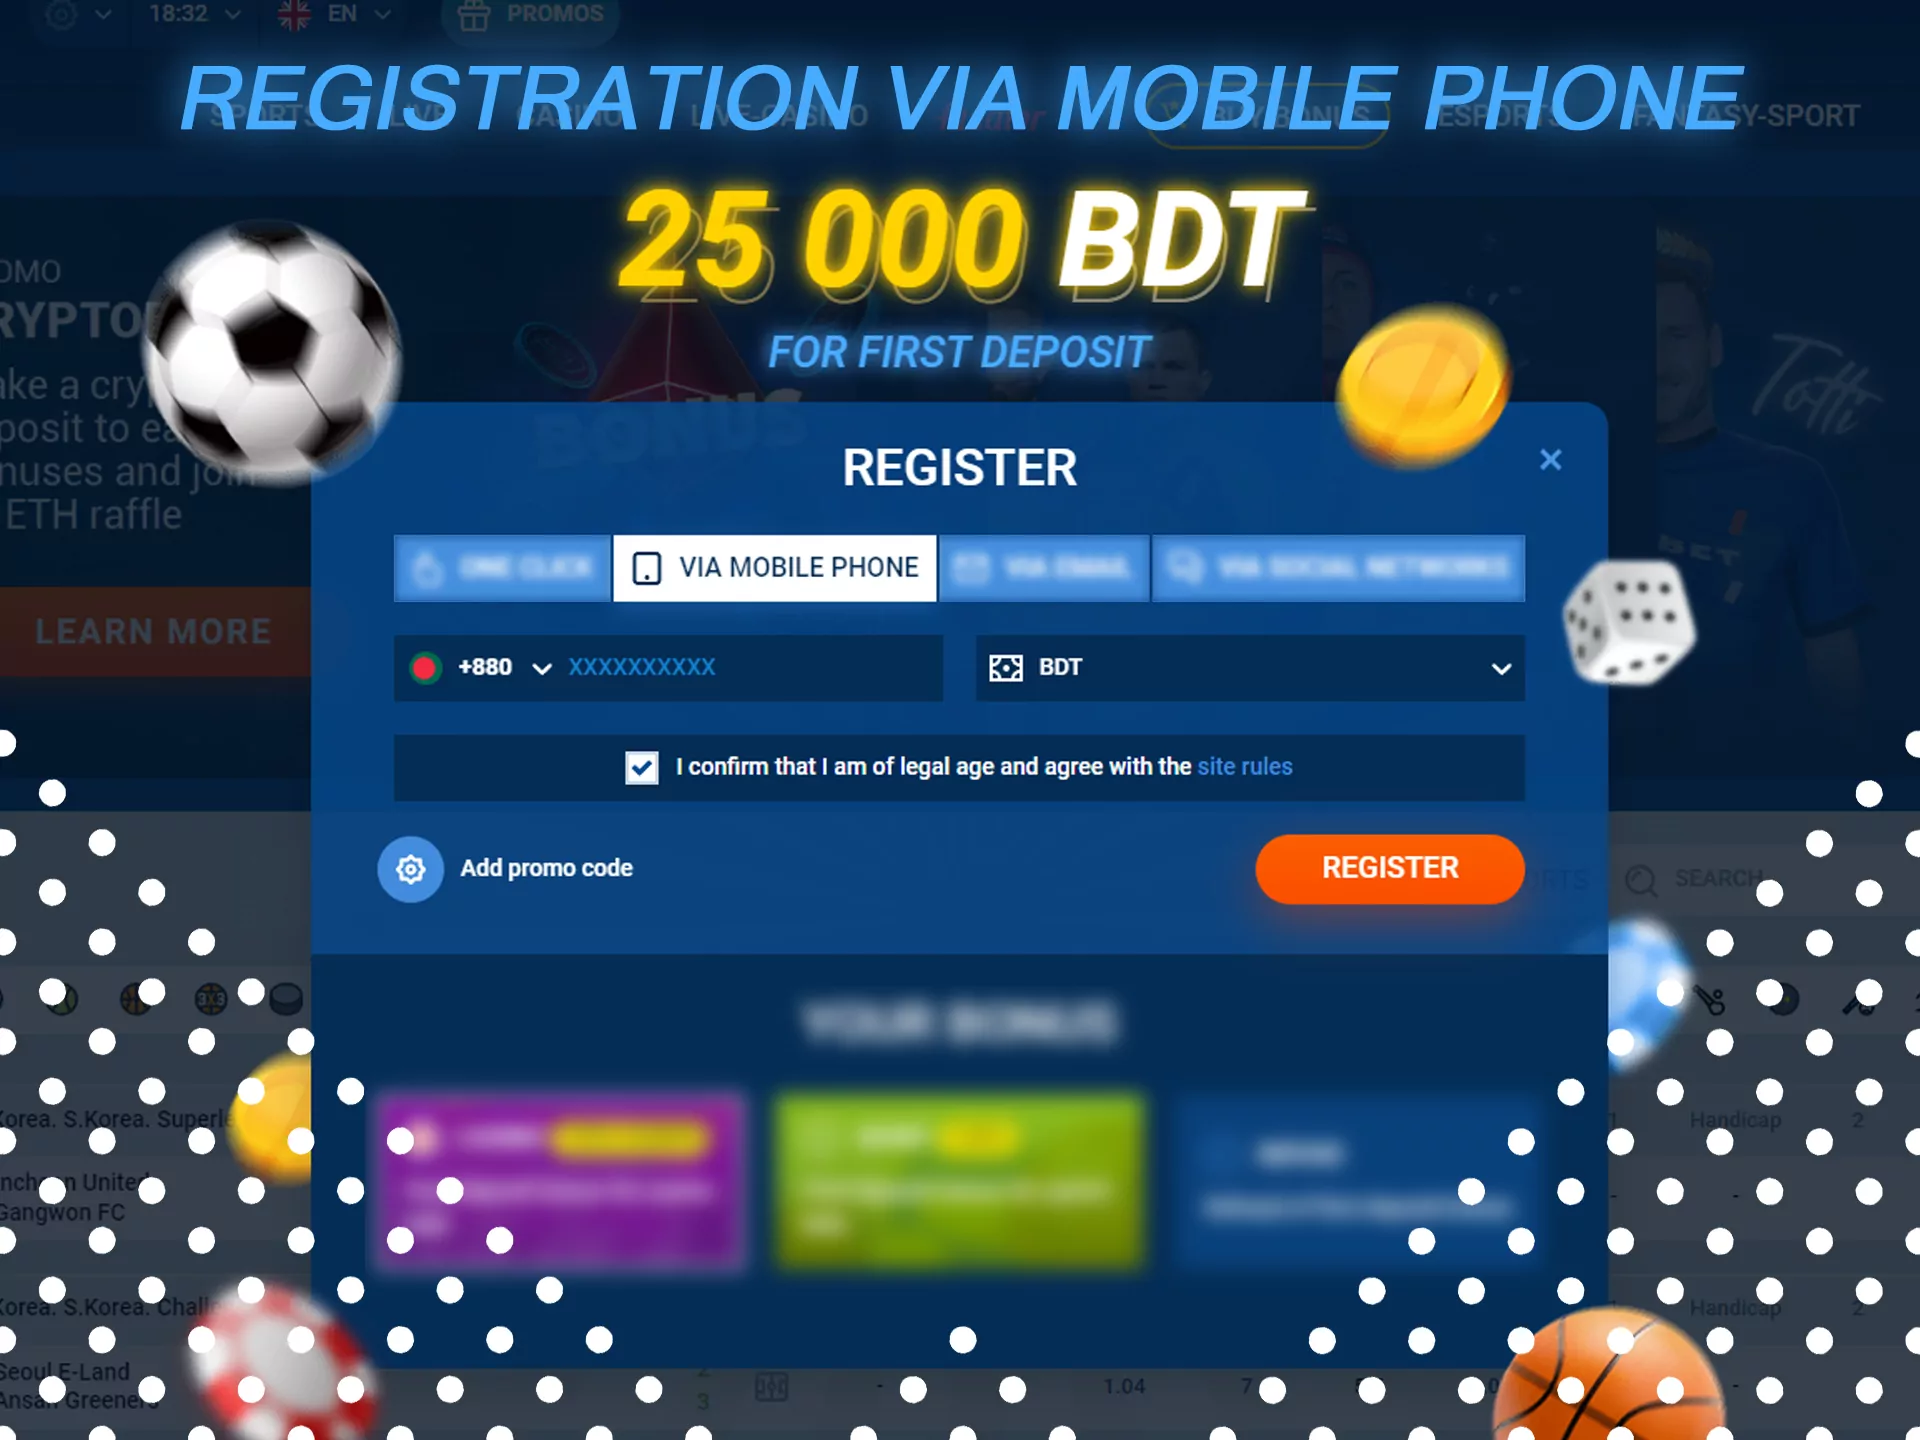 Registrate at Mostbet using your mobile phone.